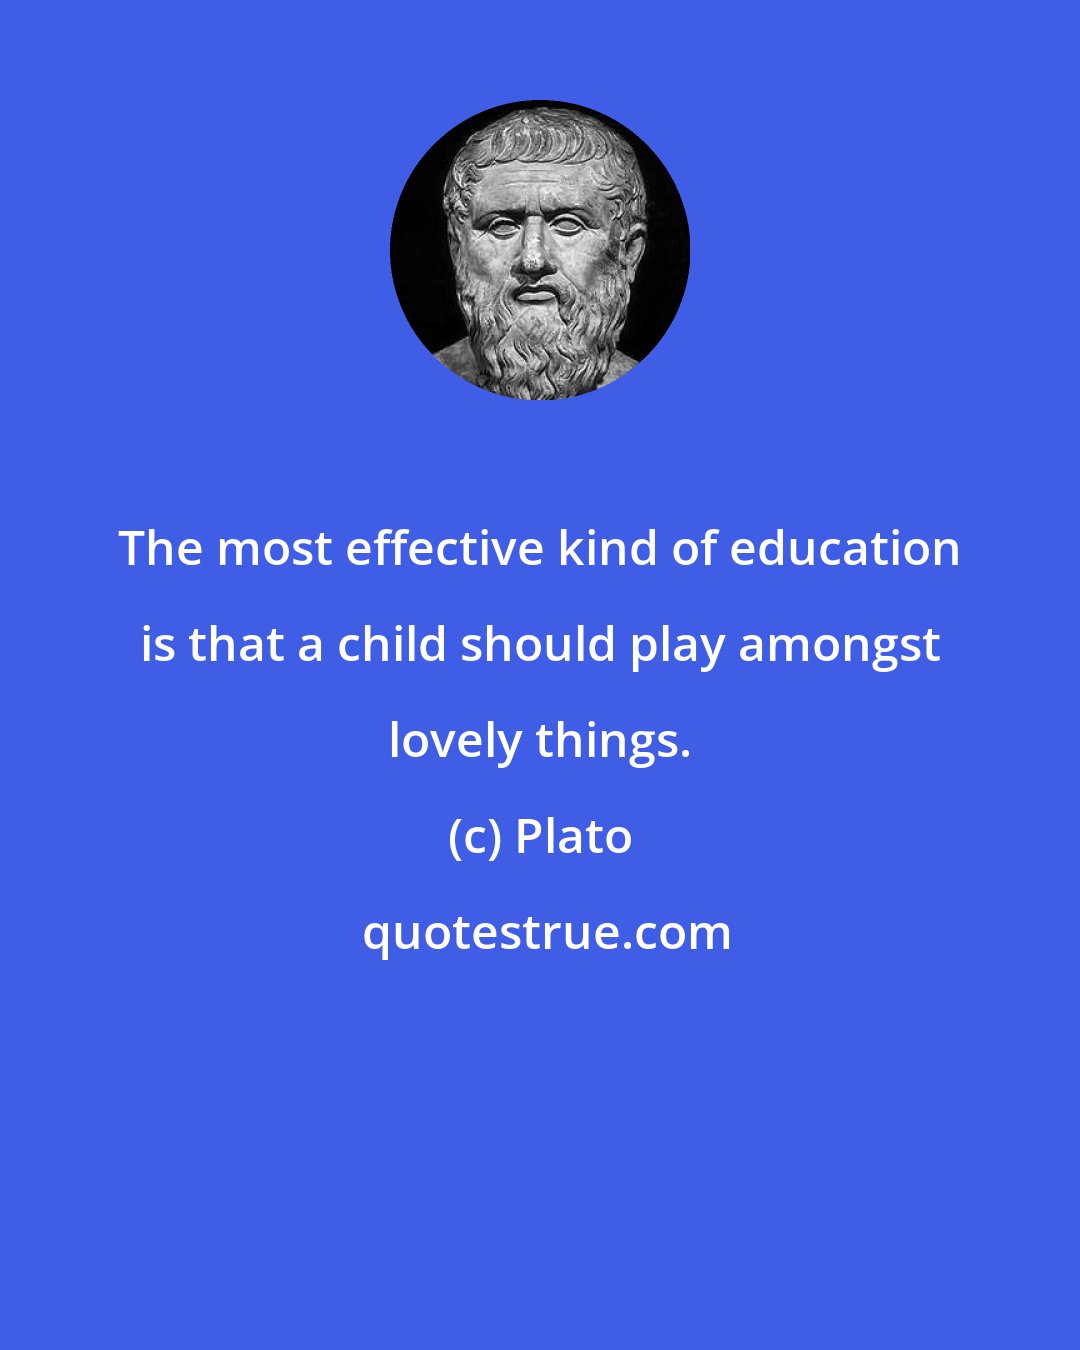 Plato: The most effective kind of education is that a child should play amongst lovely things.